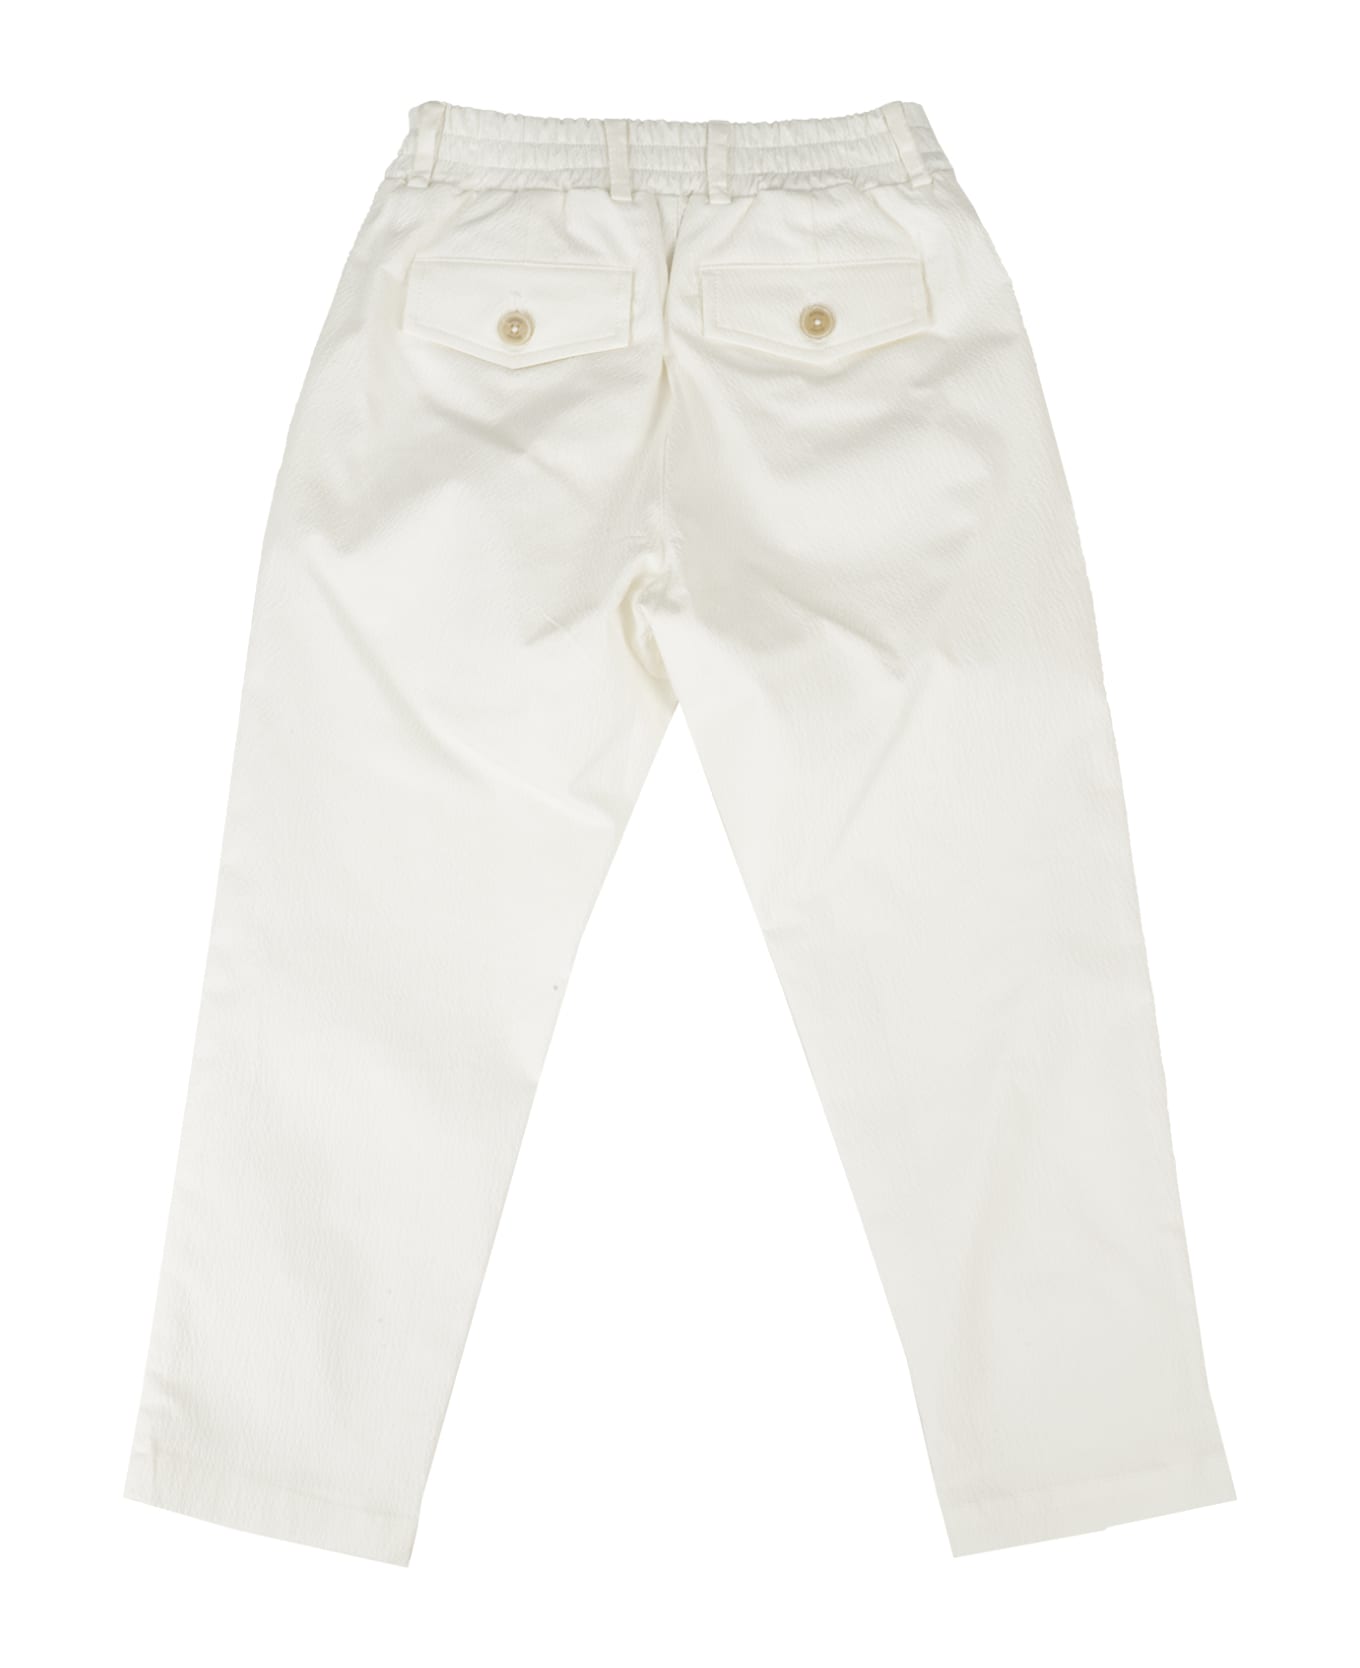 Eleventy Trousers - Ivory